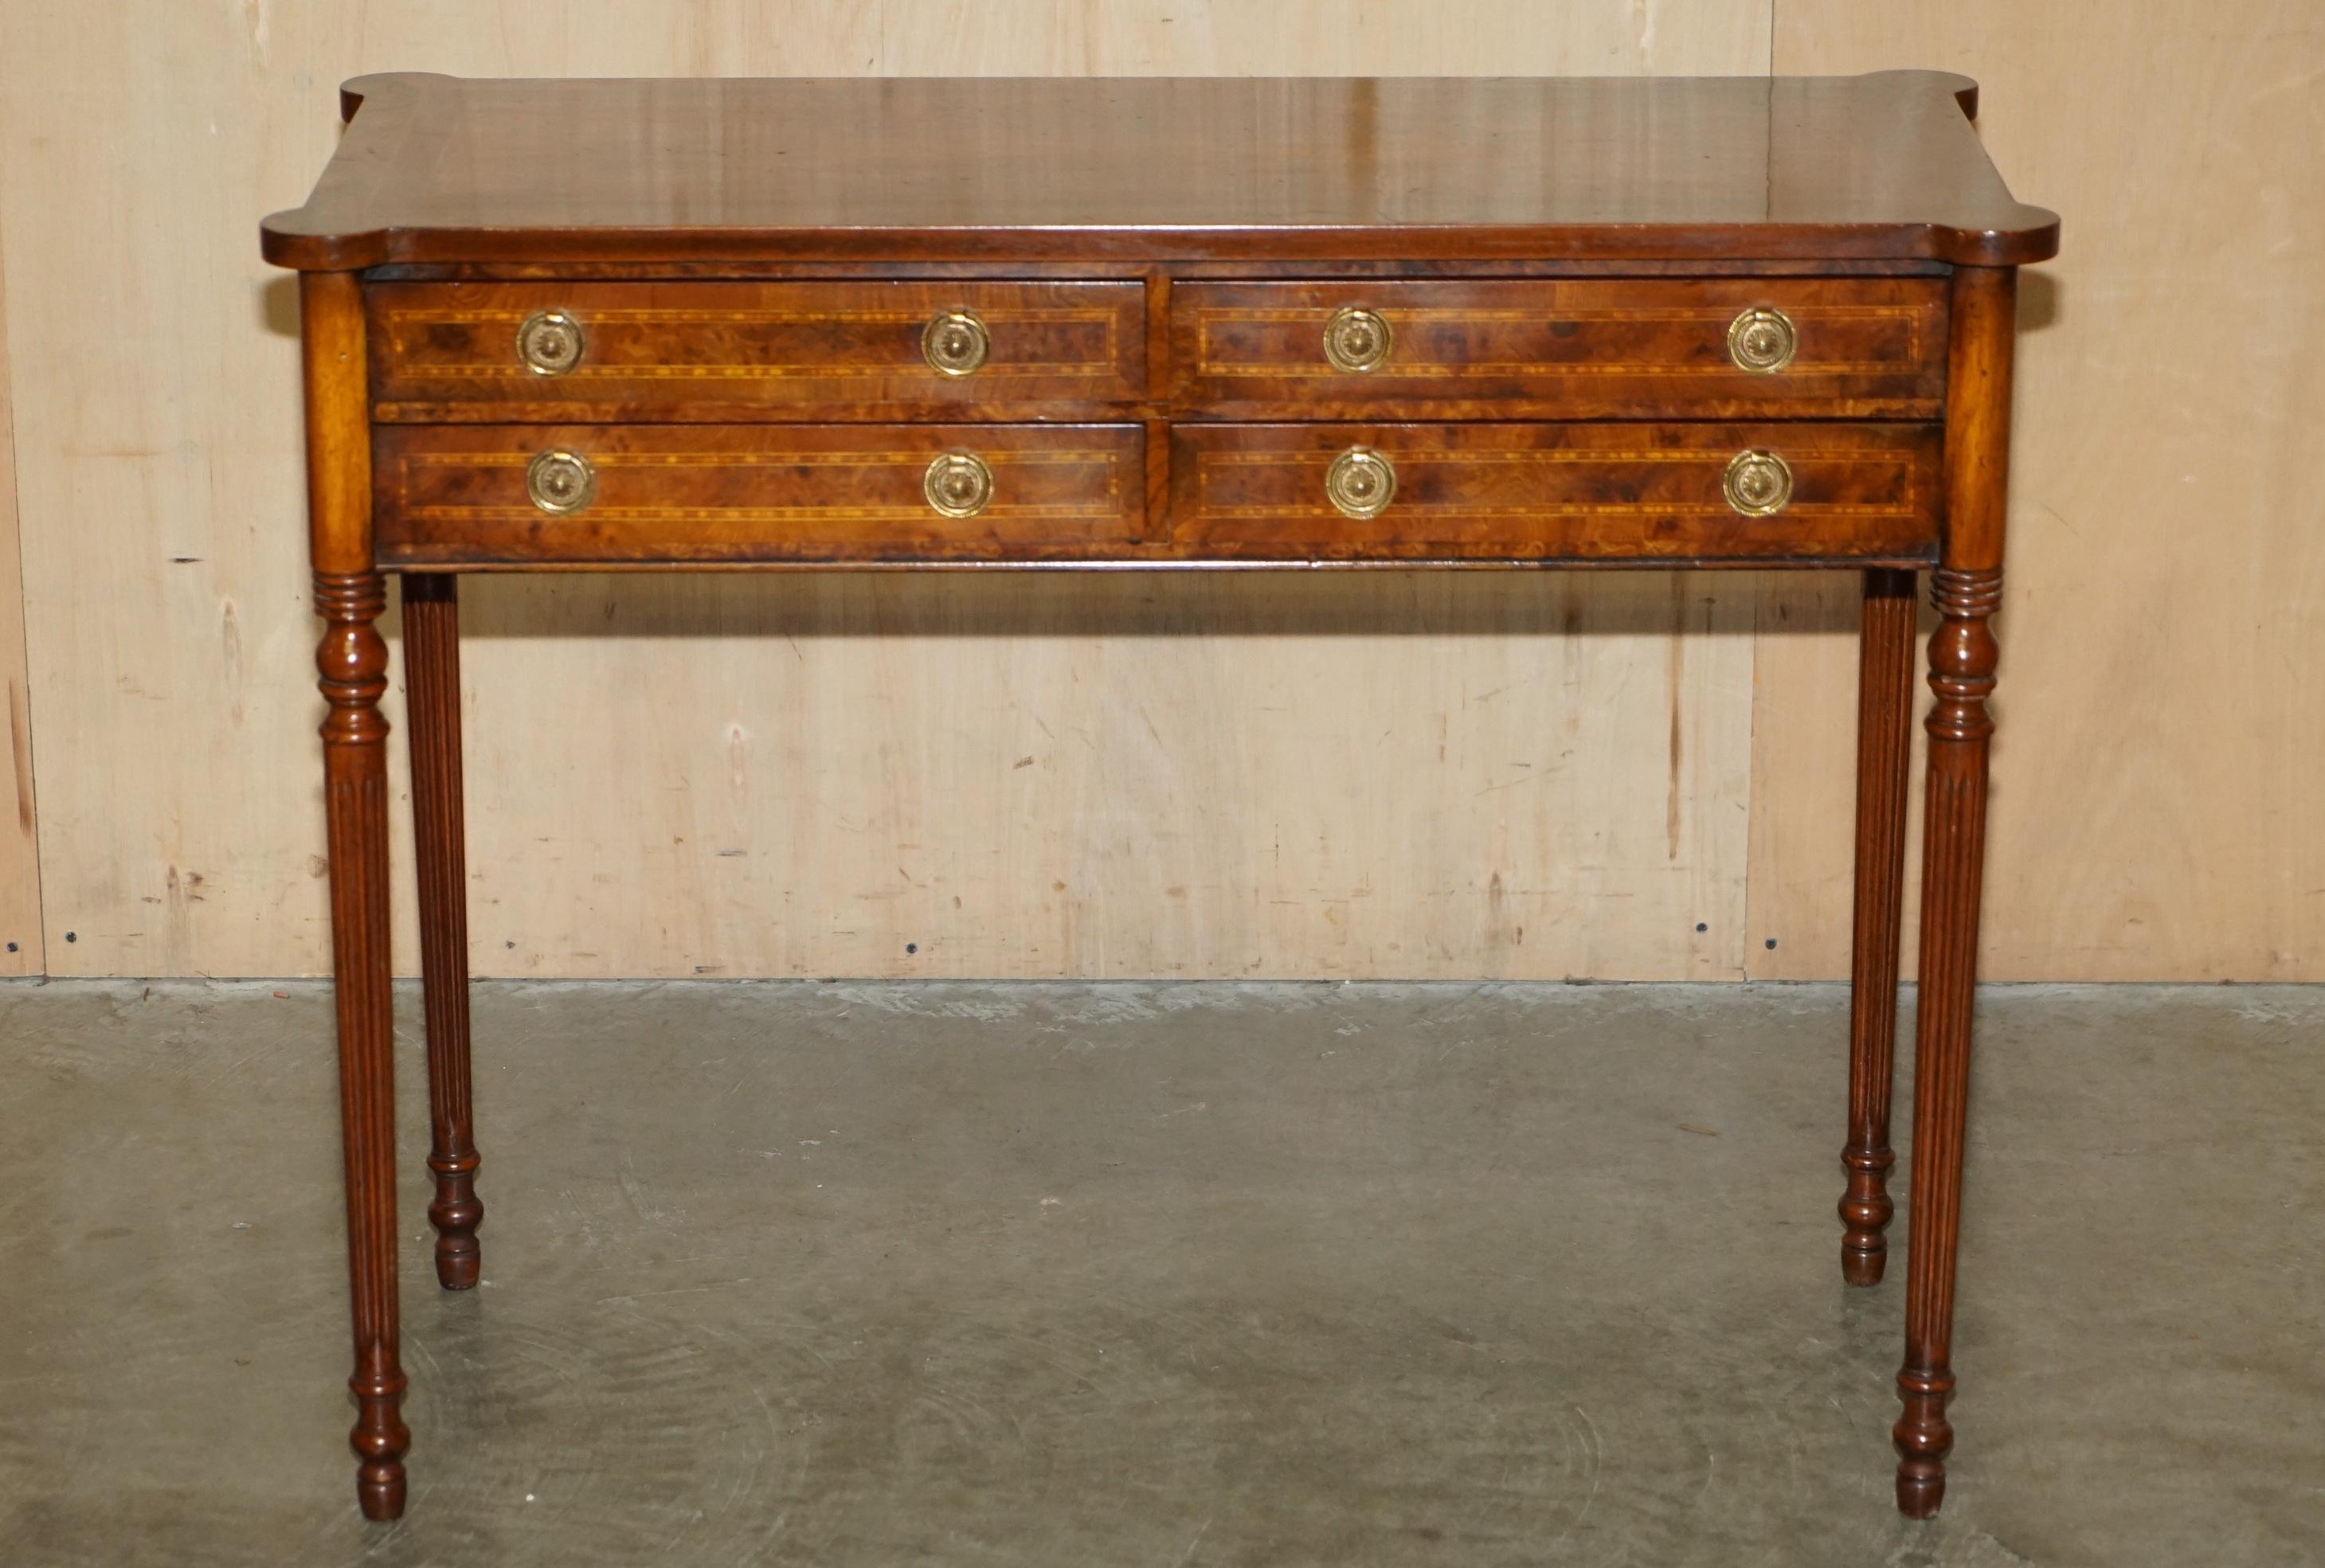 EXQUISITE CIRCA 1920 BURR ELM & SATiNWOOD FRENCH POLISHED RESTORED CONSOLE TABLE (Art déco) im Angebot